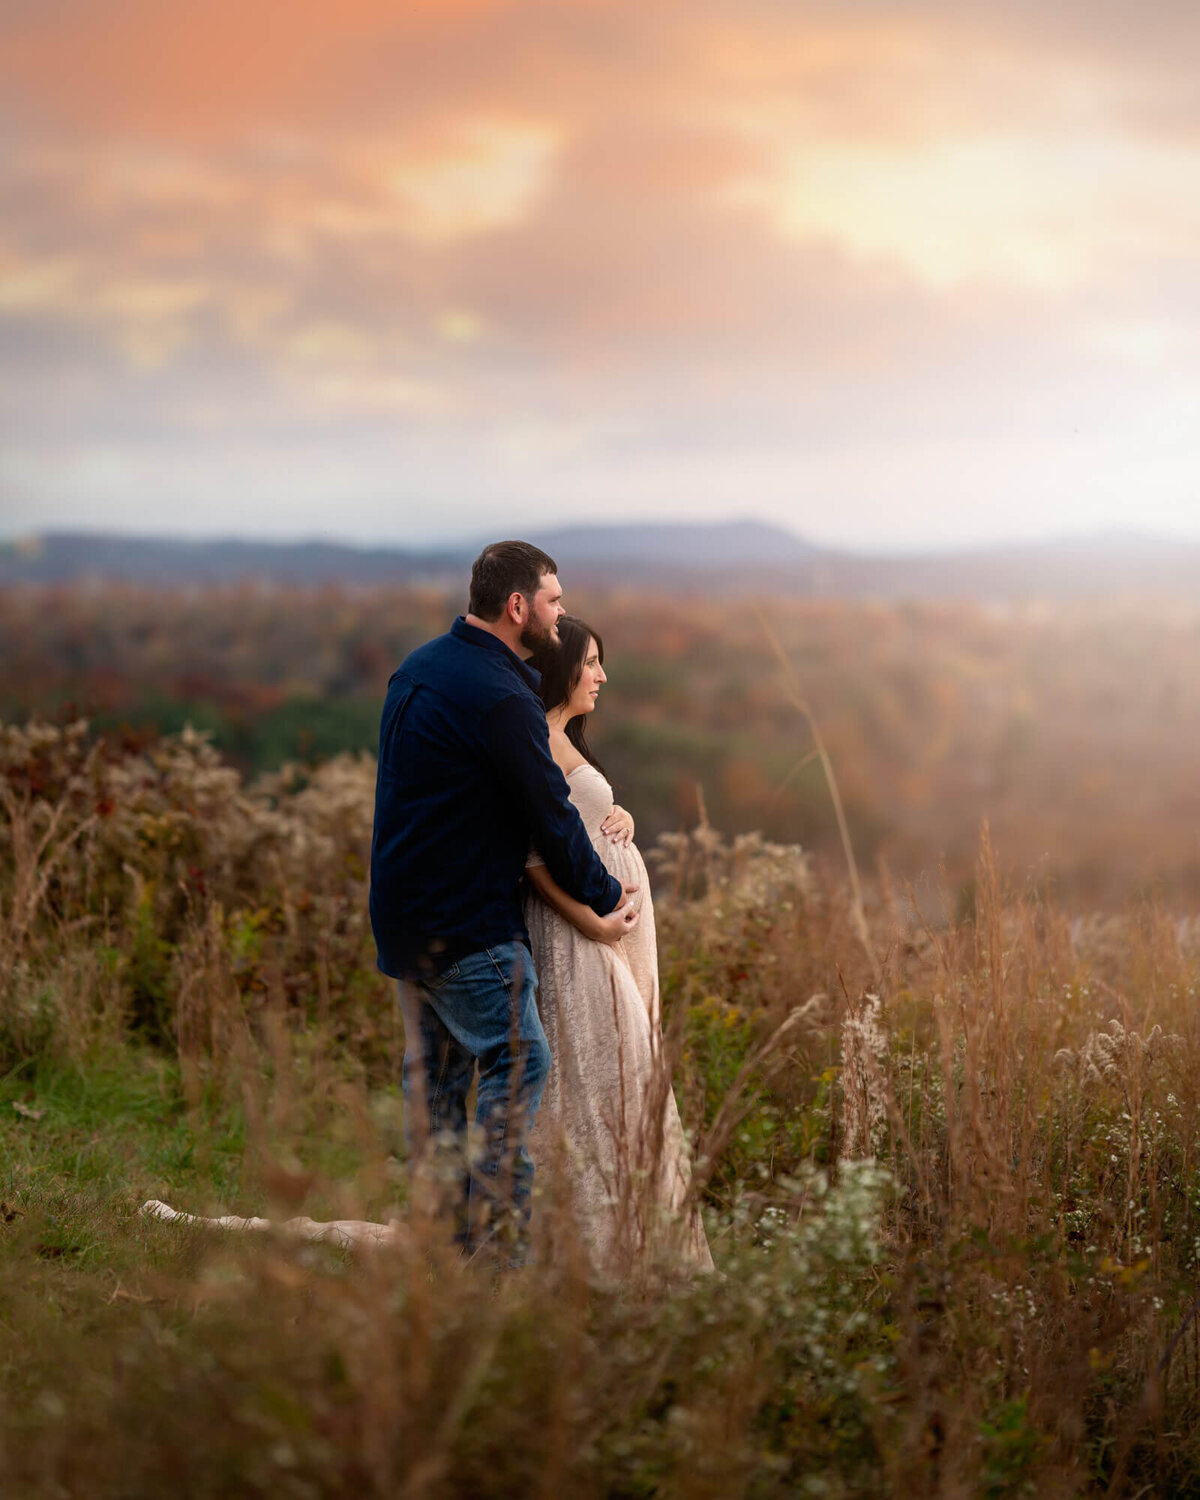 An expecting couple embraces as the dreamy light from a sunset envelopes them